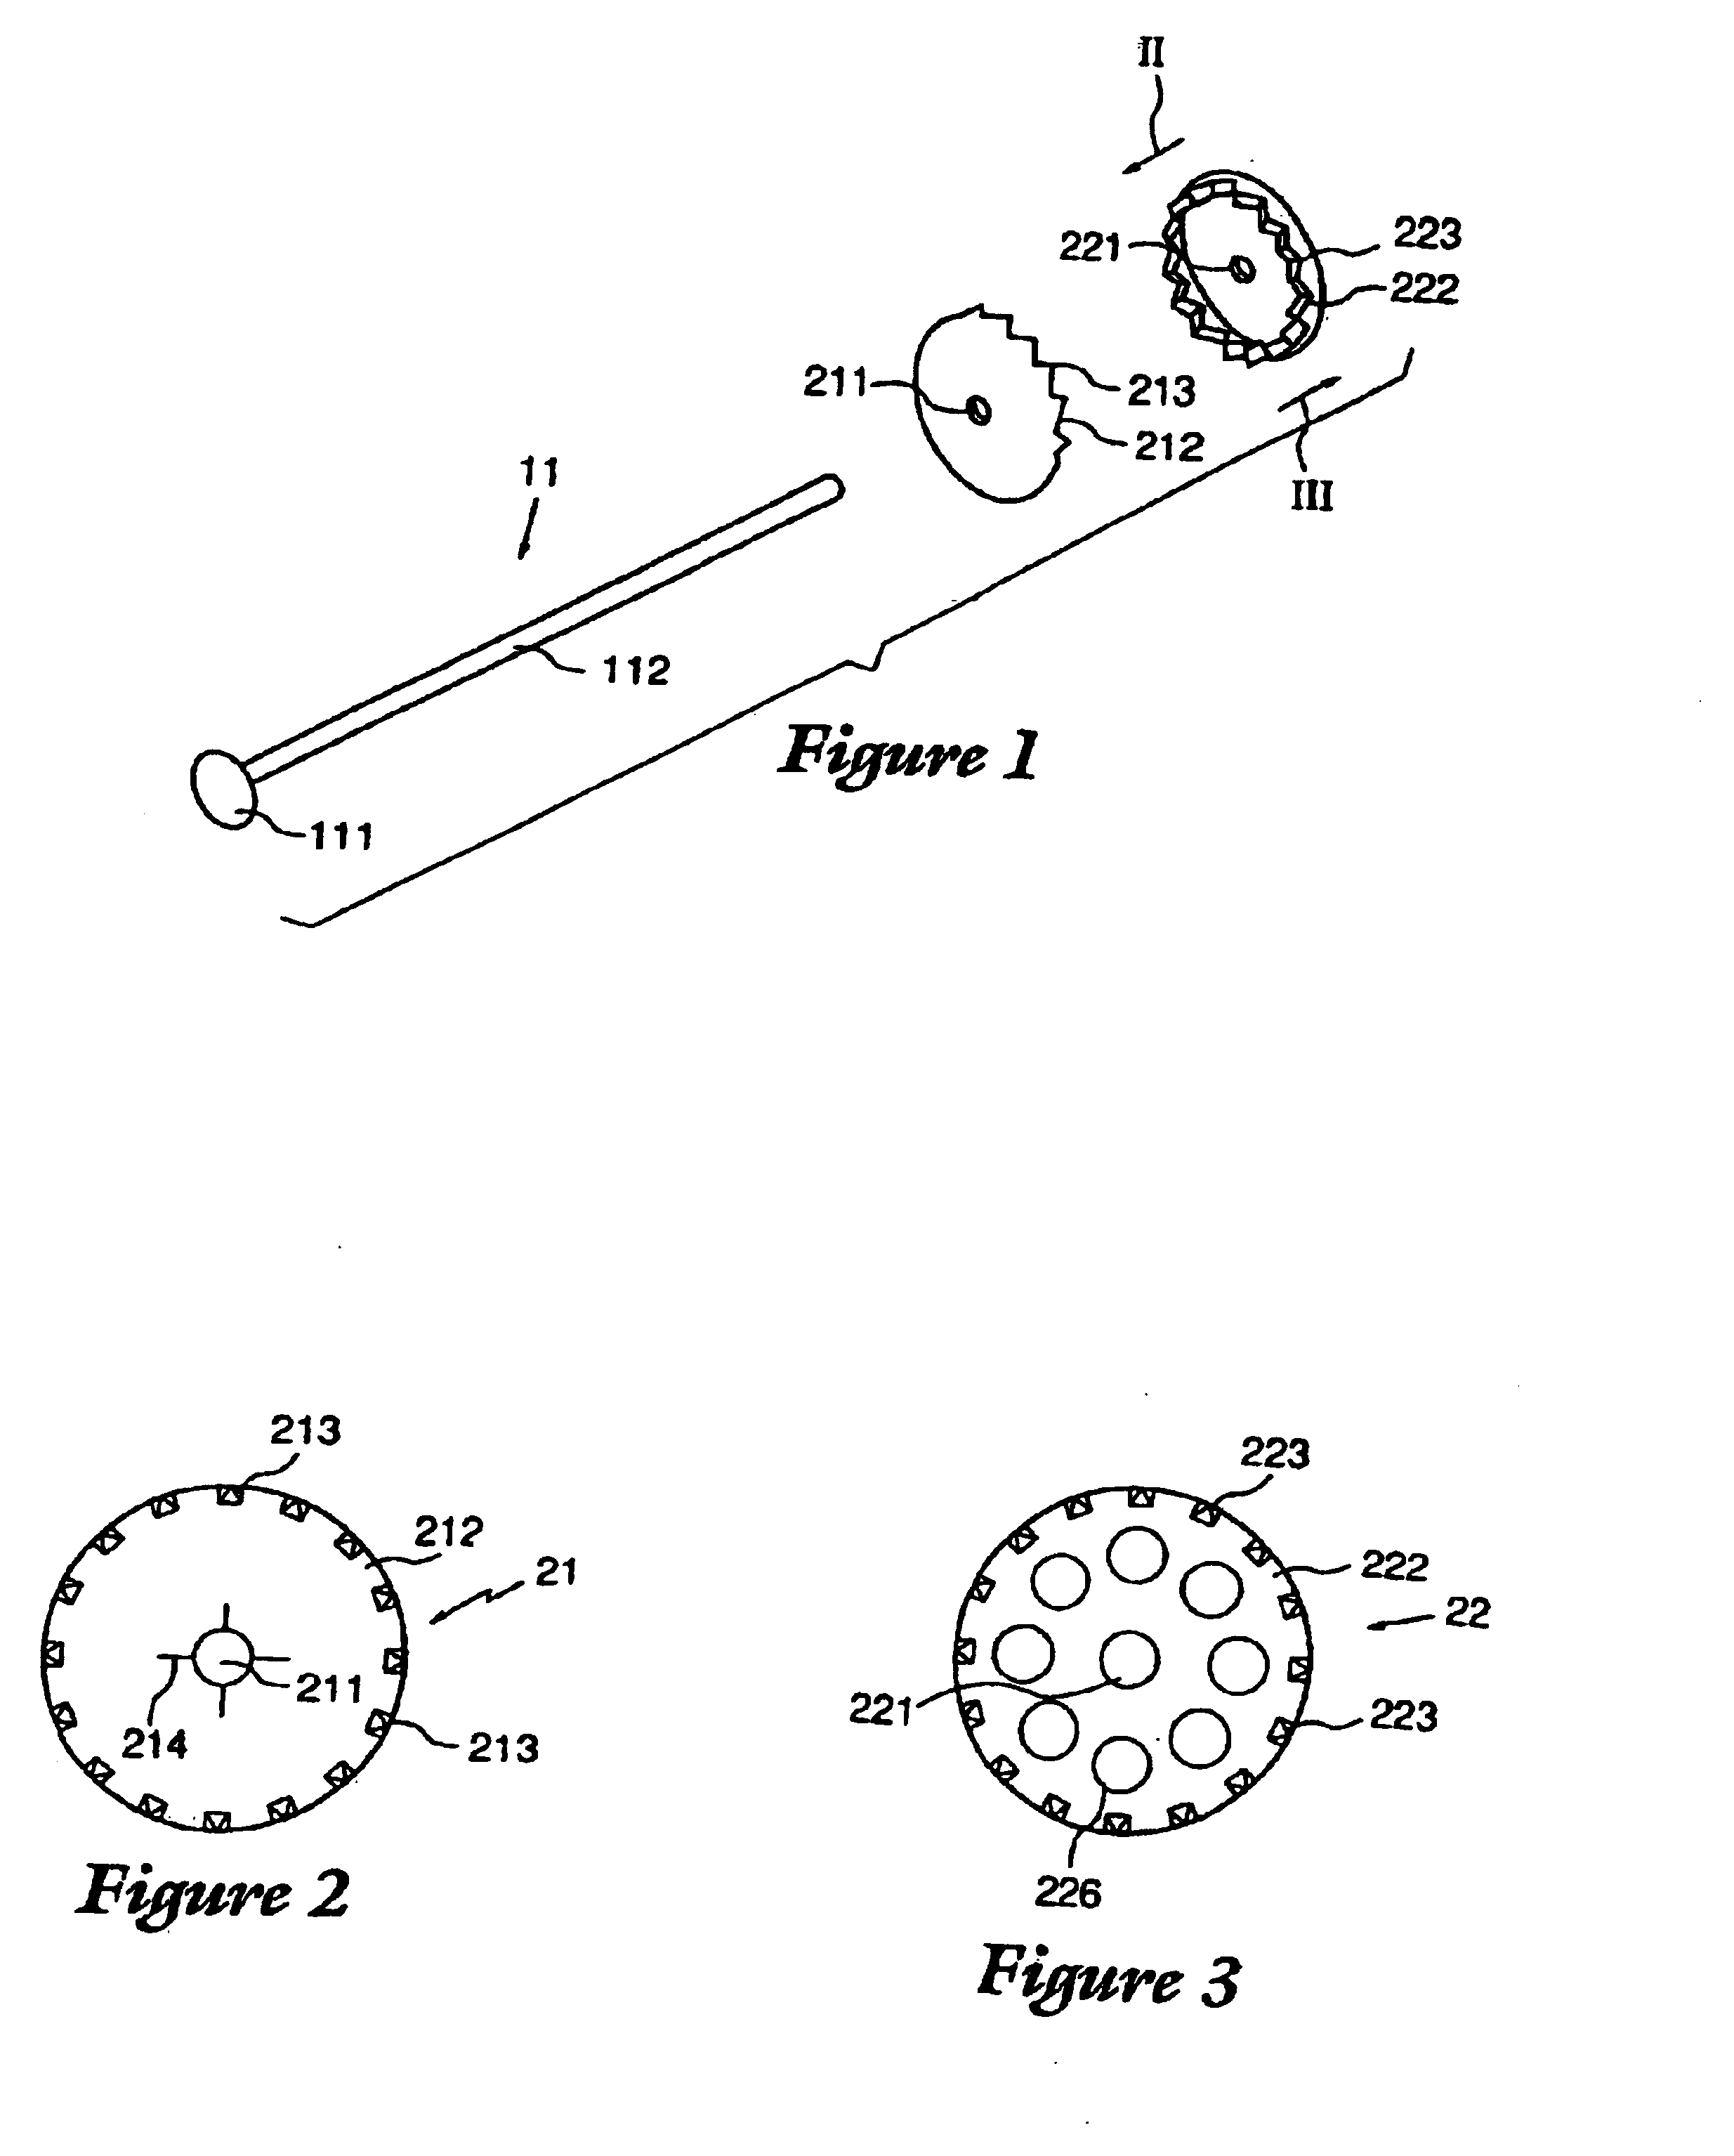 Device for postoperative fixation back into the cranium of a plug of bone removed therefrom during a surgical operation